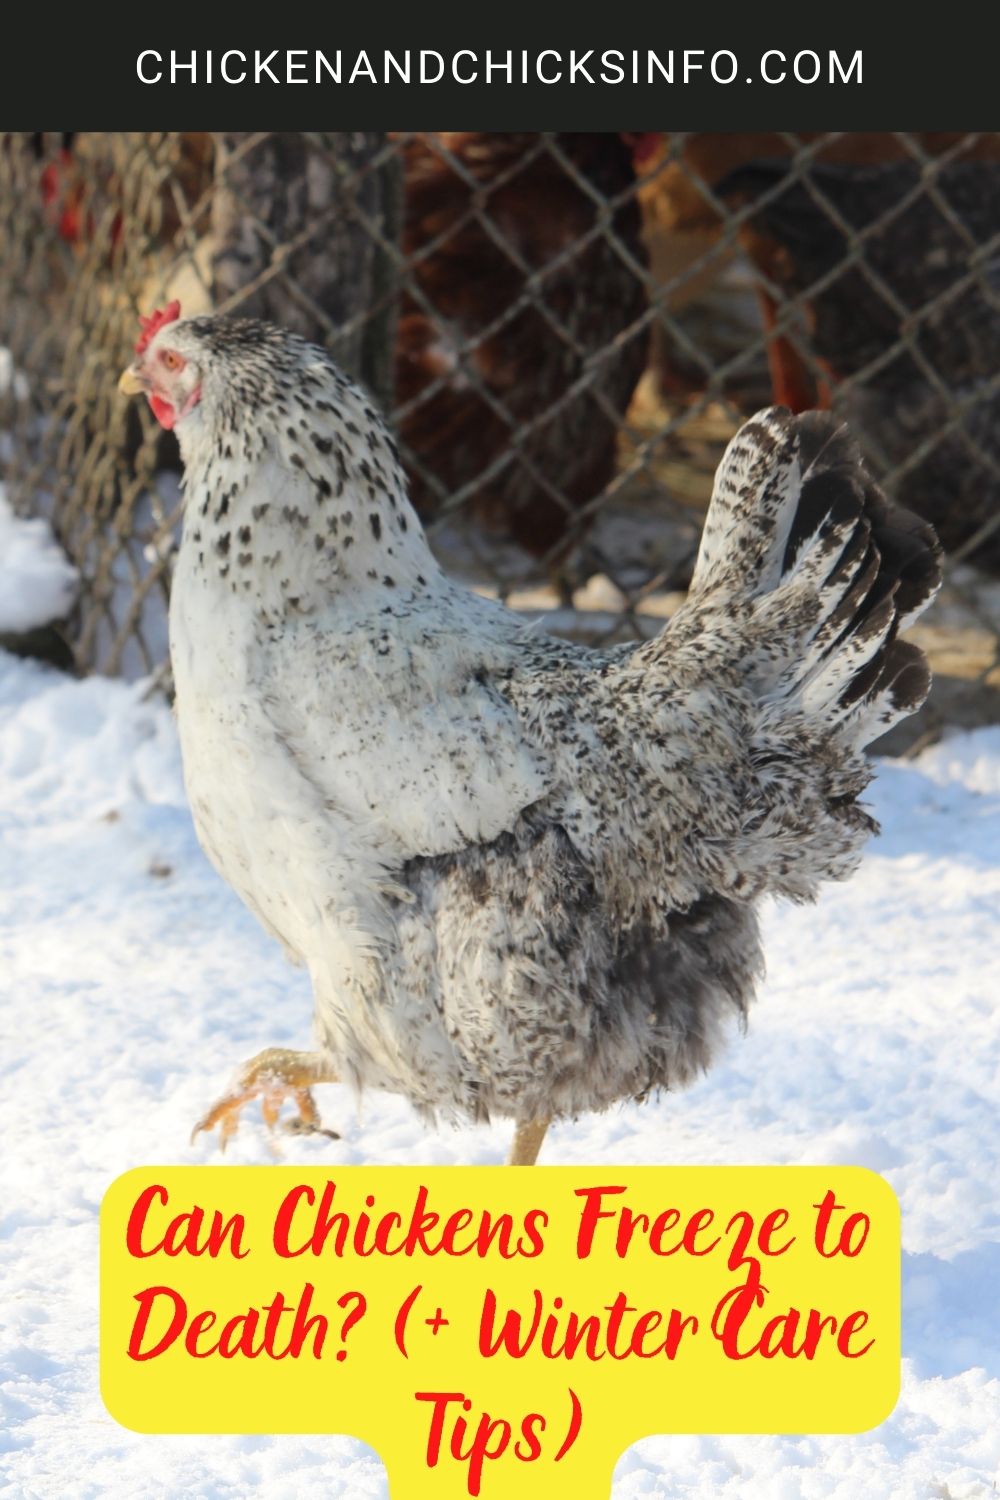 Can Chickens Freeze to Death? (+ Winter Care Tips) poster.
